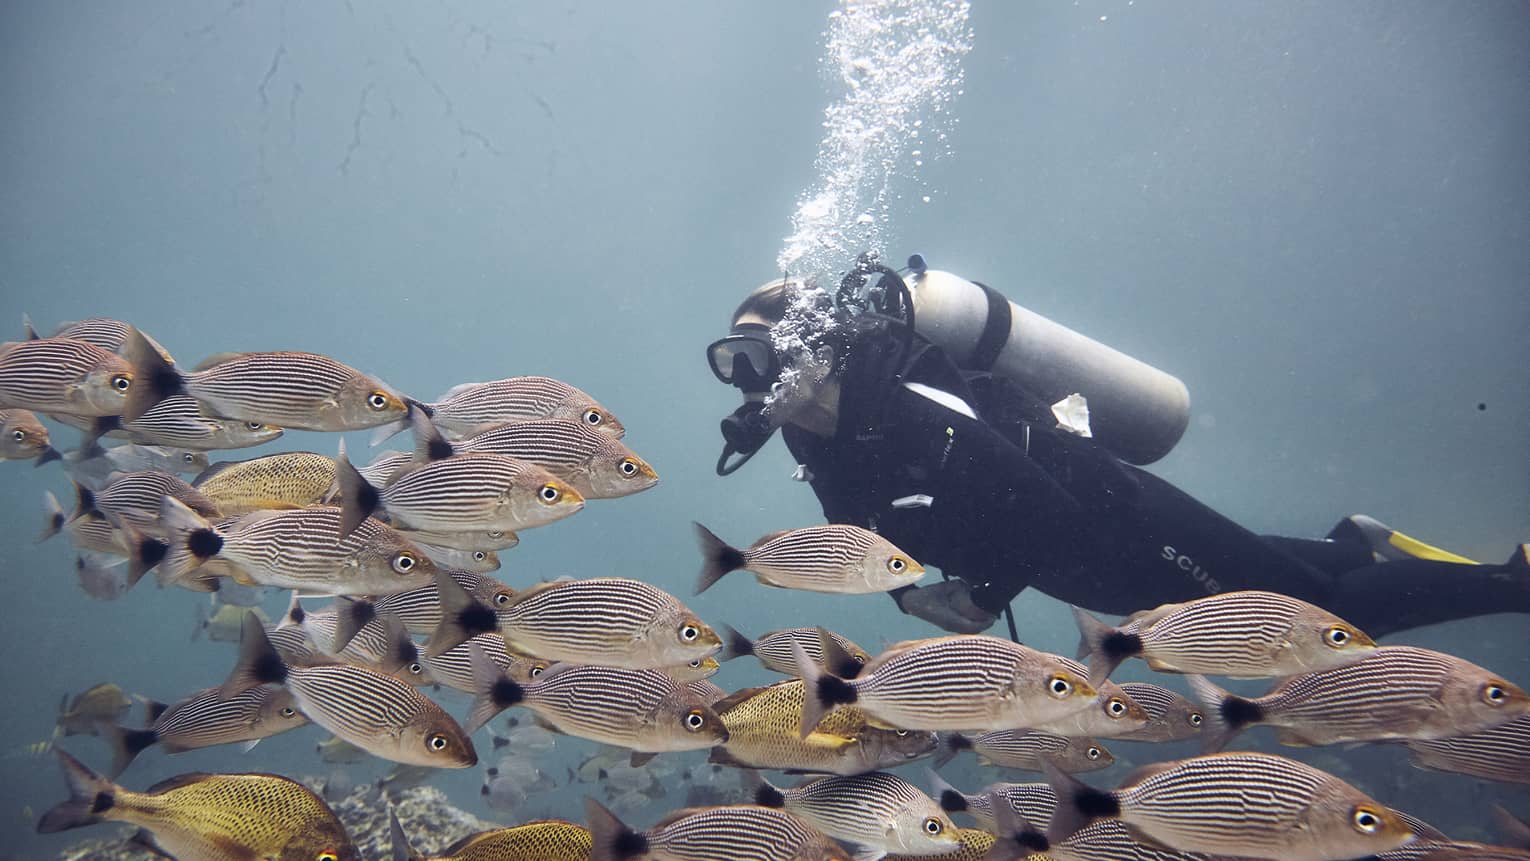 Woman scuba dives among a school of coulourful striped fish, the open ocean behind her